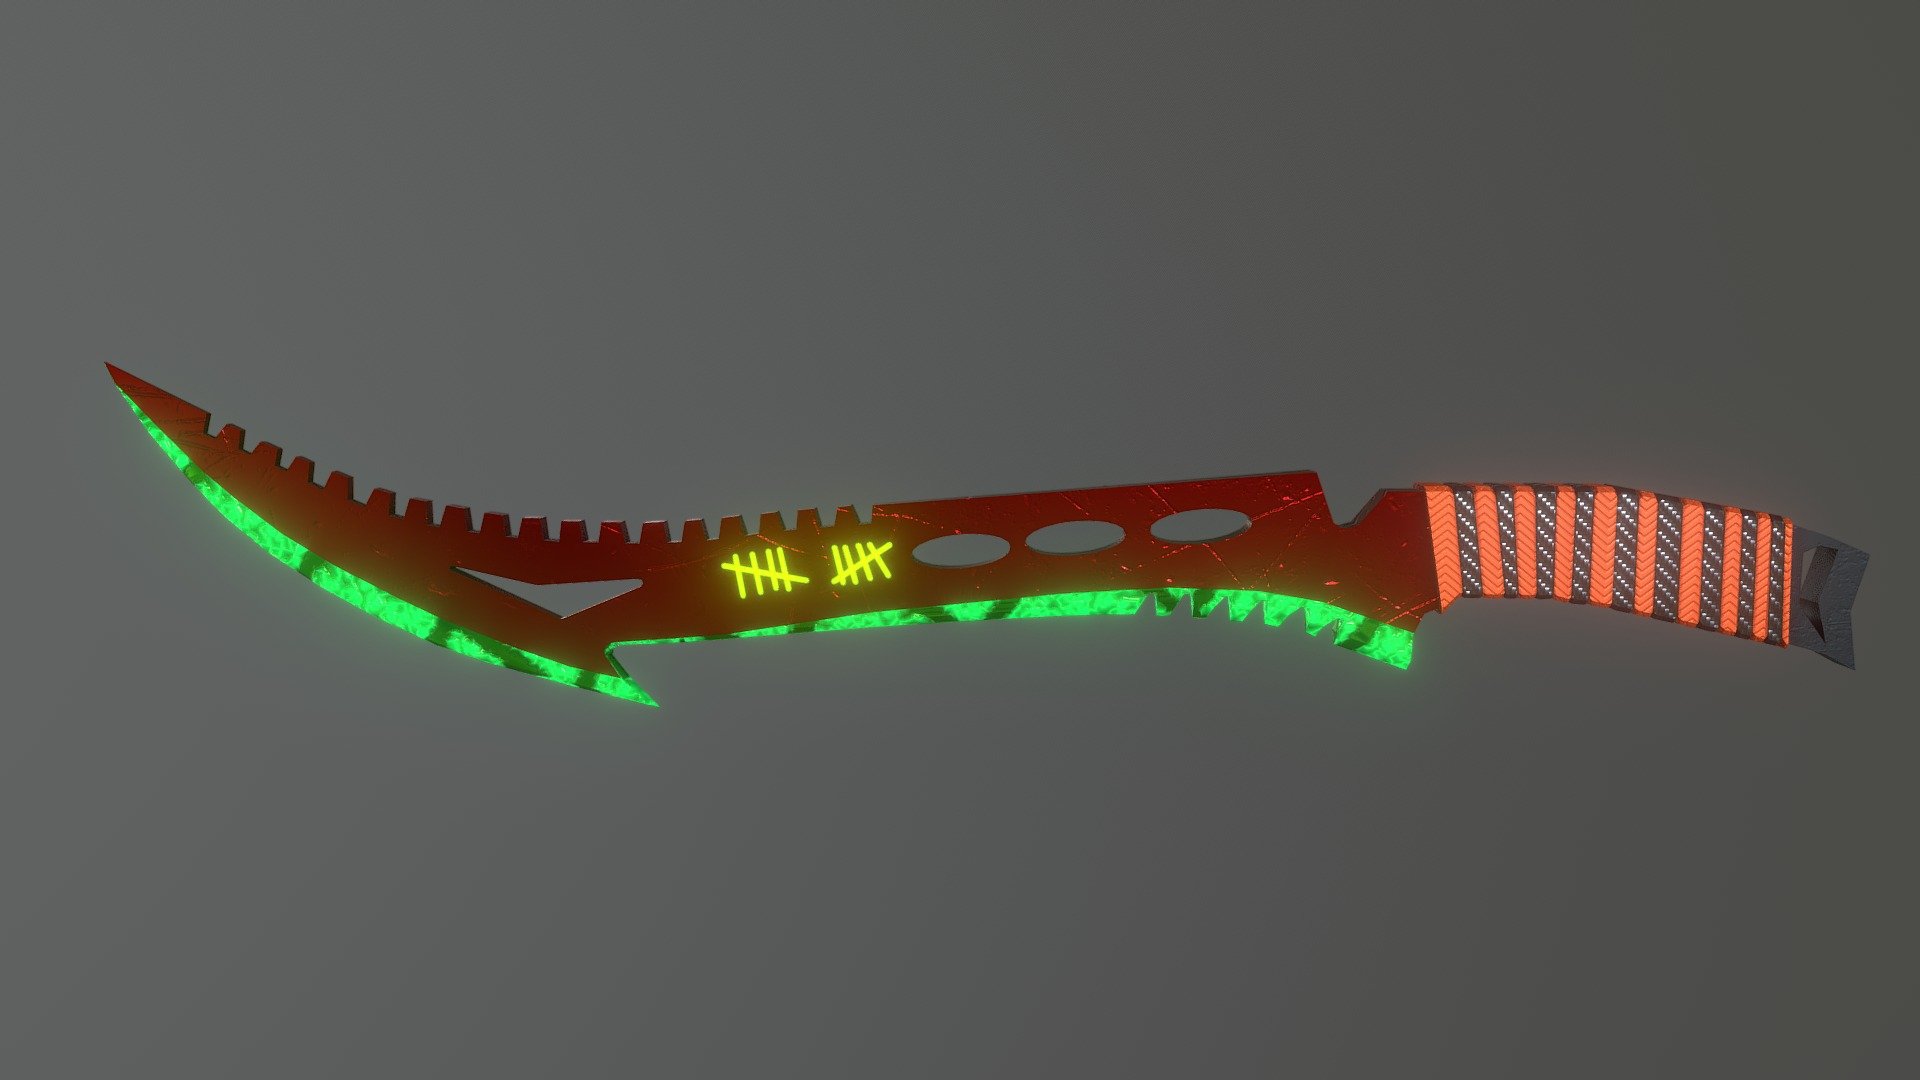 Concept Weapon "Dying Light"